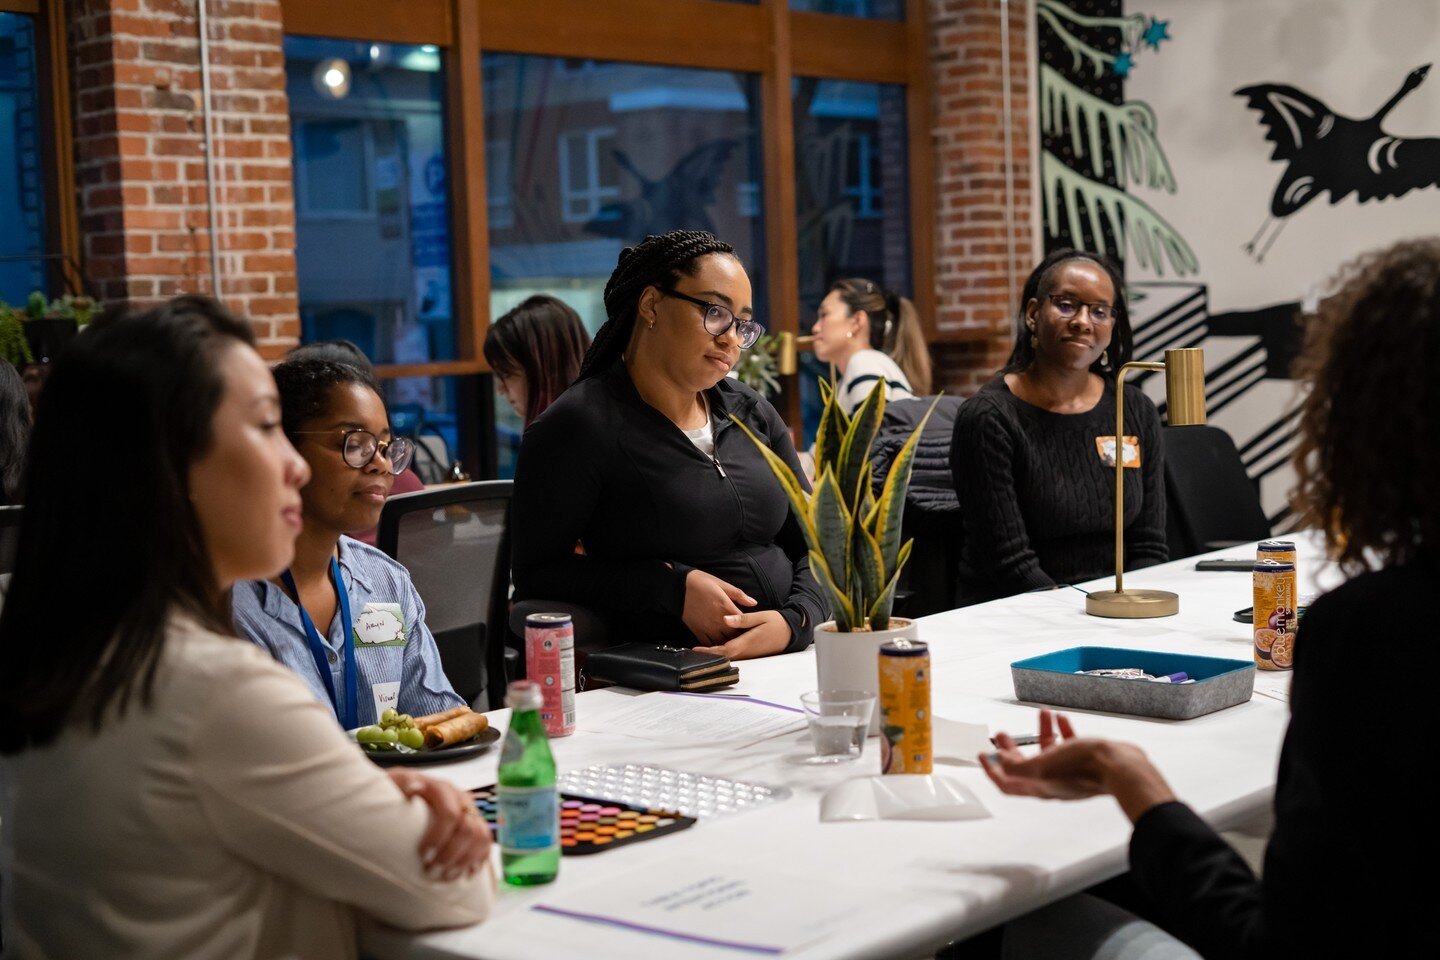 On behalf of STEM/Femmes of Color, I am thrilled to be co-hosting an evening event in partnership with the Women In Tech Regatta on the evening of May 1st at Citizen M Hotel, Seattle from 6-8PM.

Thank you @melodybiringer and @Juriana Spierenburg for